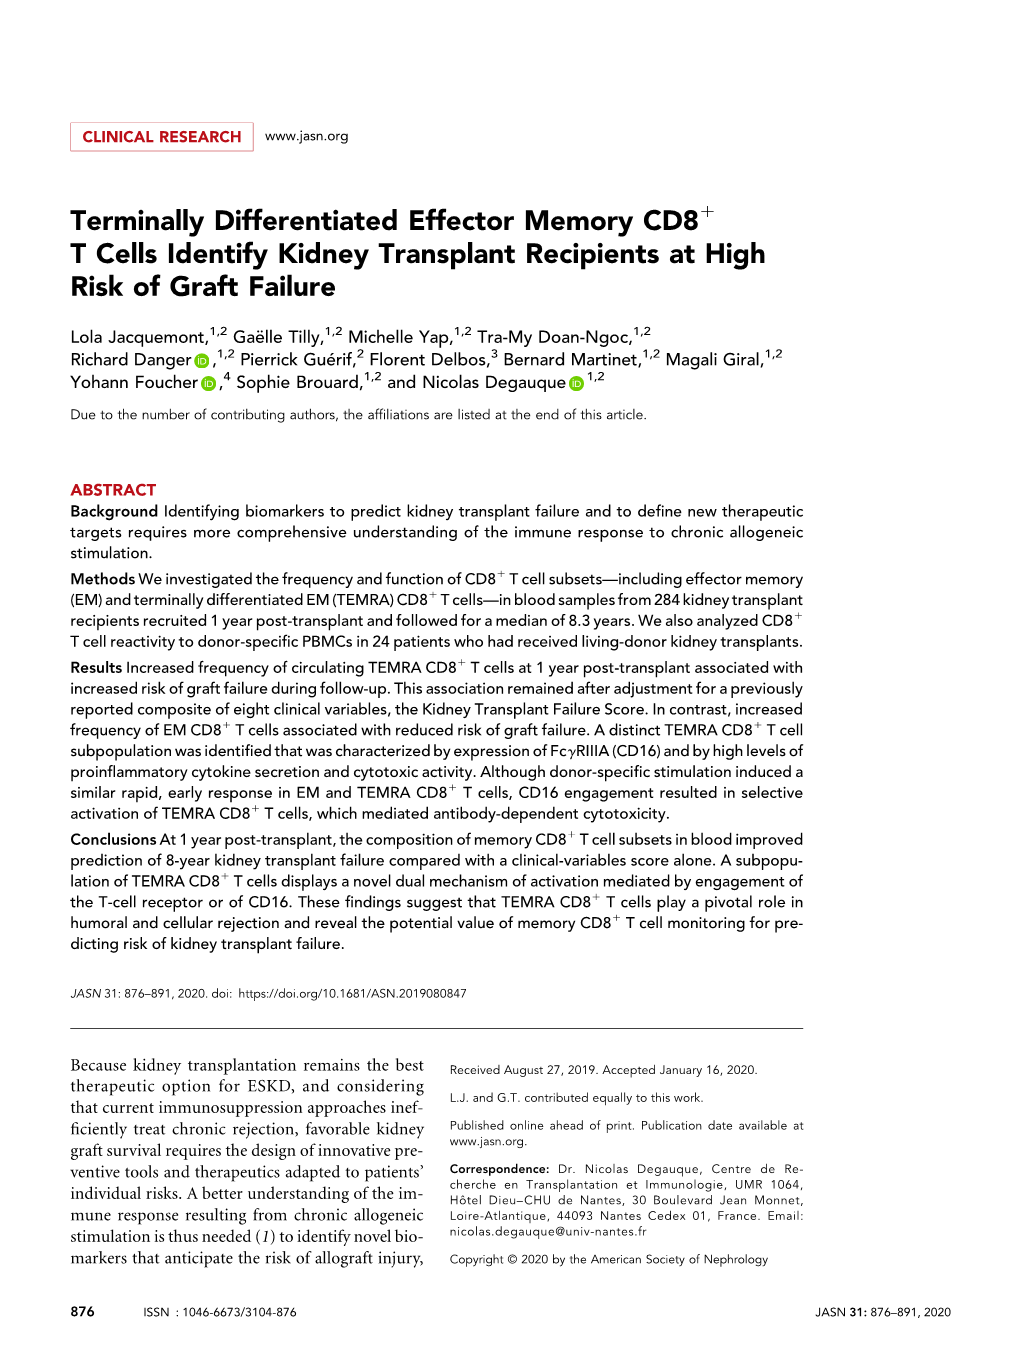 Terminally Differentiated Effector Memory CD8 T Cells Identify Kidney Transplant Recipients at High Risk of Graft Failure